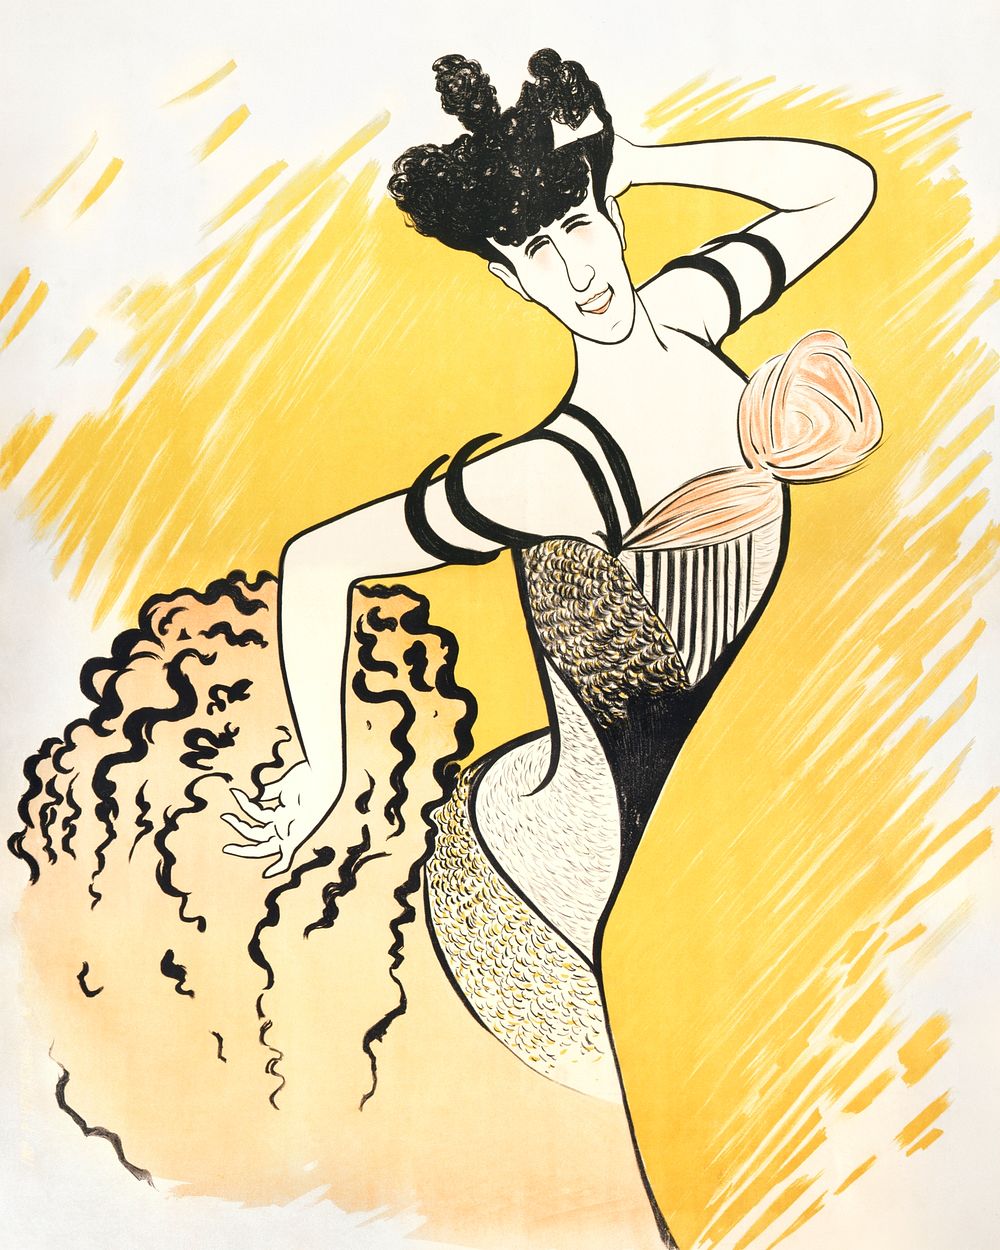 Vintage dancer in yellow dress illustration, remixed from artworks by Leonetto Cappiello